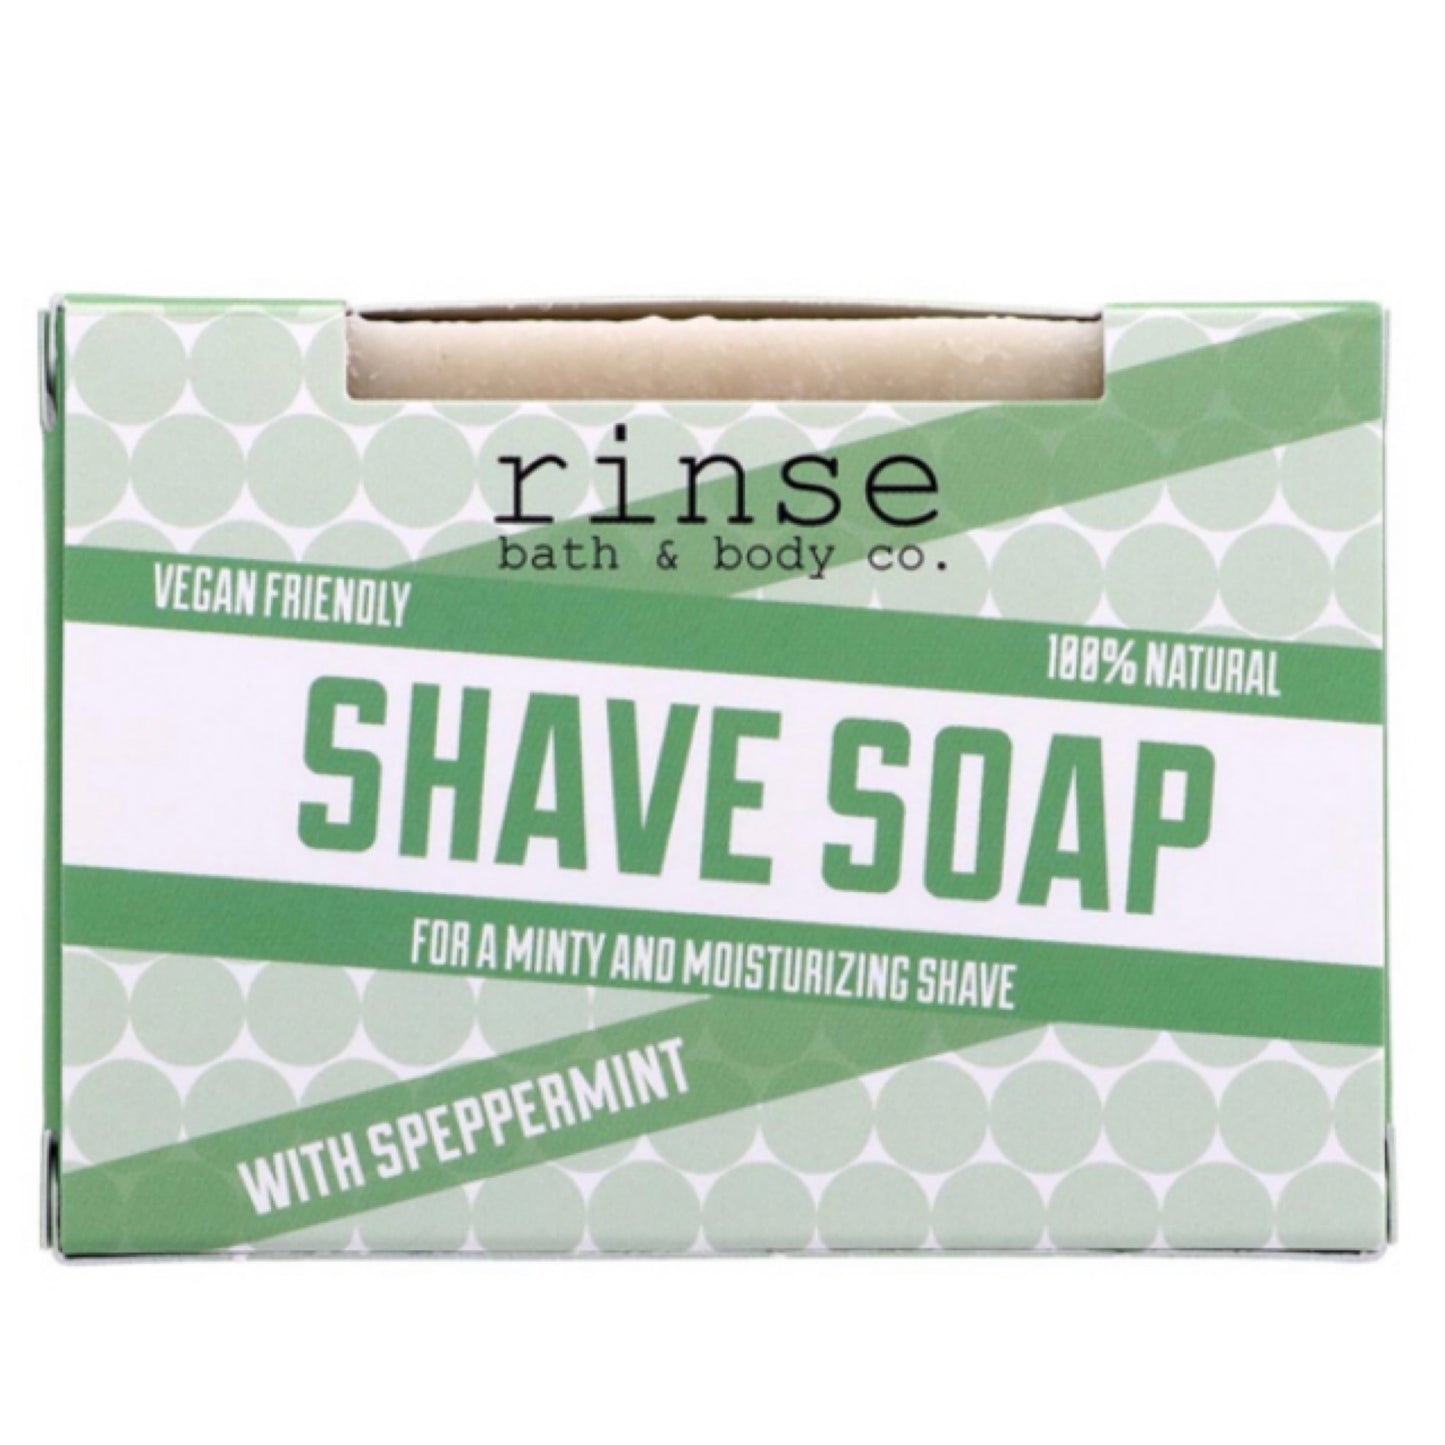 Speppermint Shave Soap